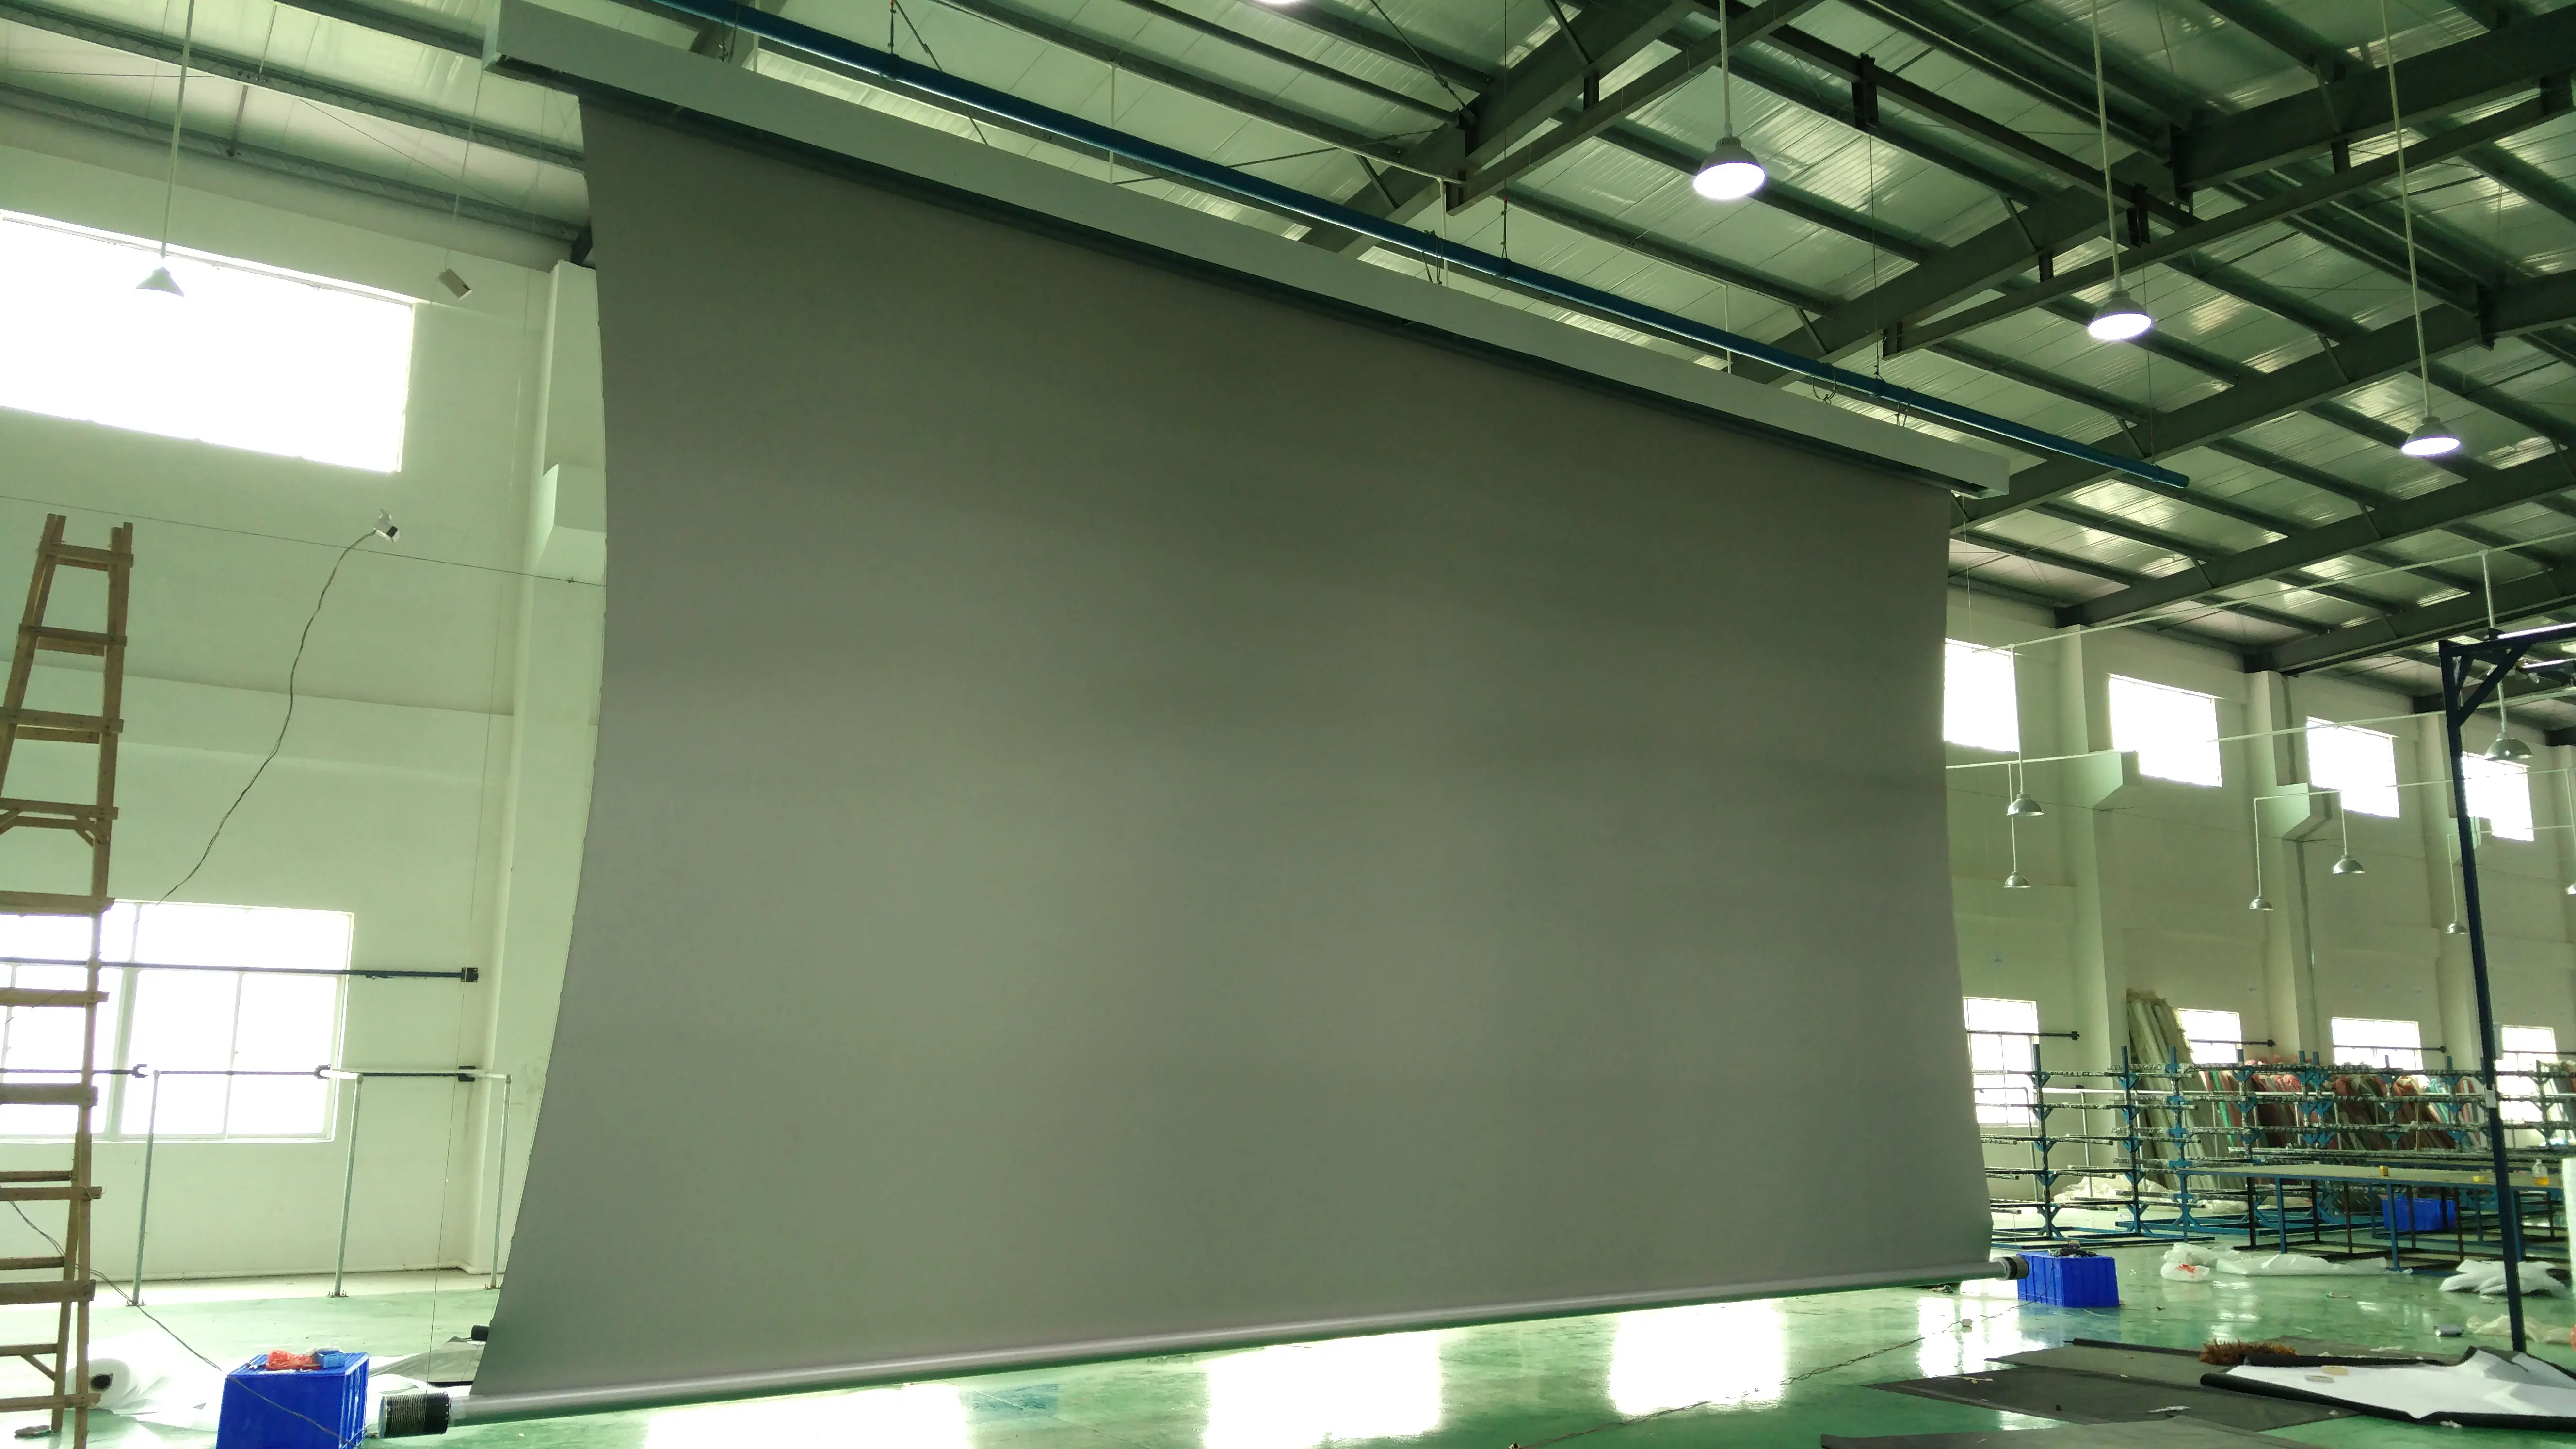 movie theater screen 500 inch movie theater screen big size projection screen